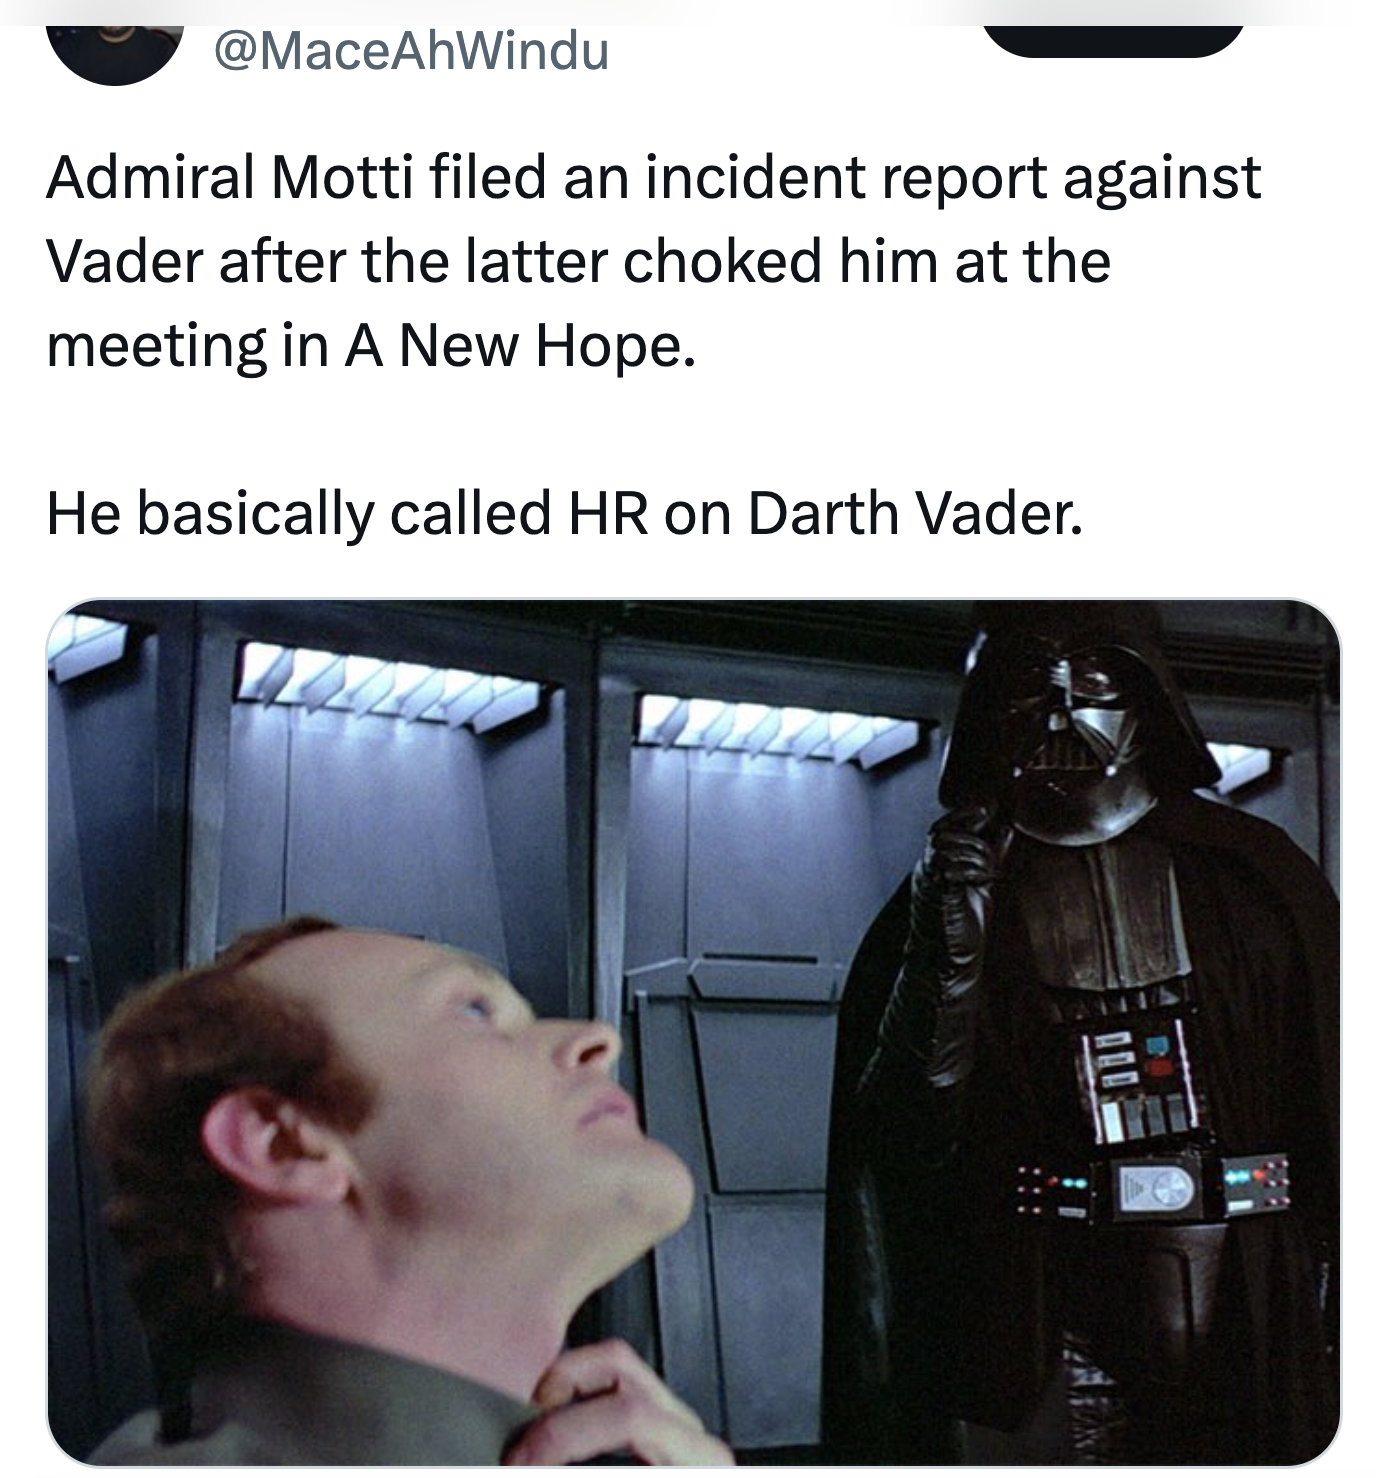 darth vader lack of faith - Admiral Motti filed an incident report against Vader after the latter choked him at the meeting in A New Hope. He basically called Hr on Darth Vader.